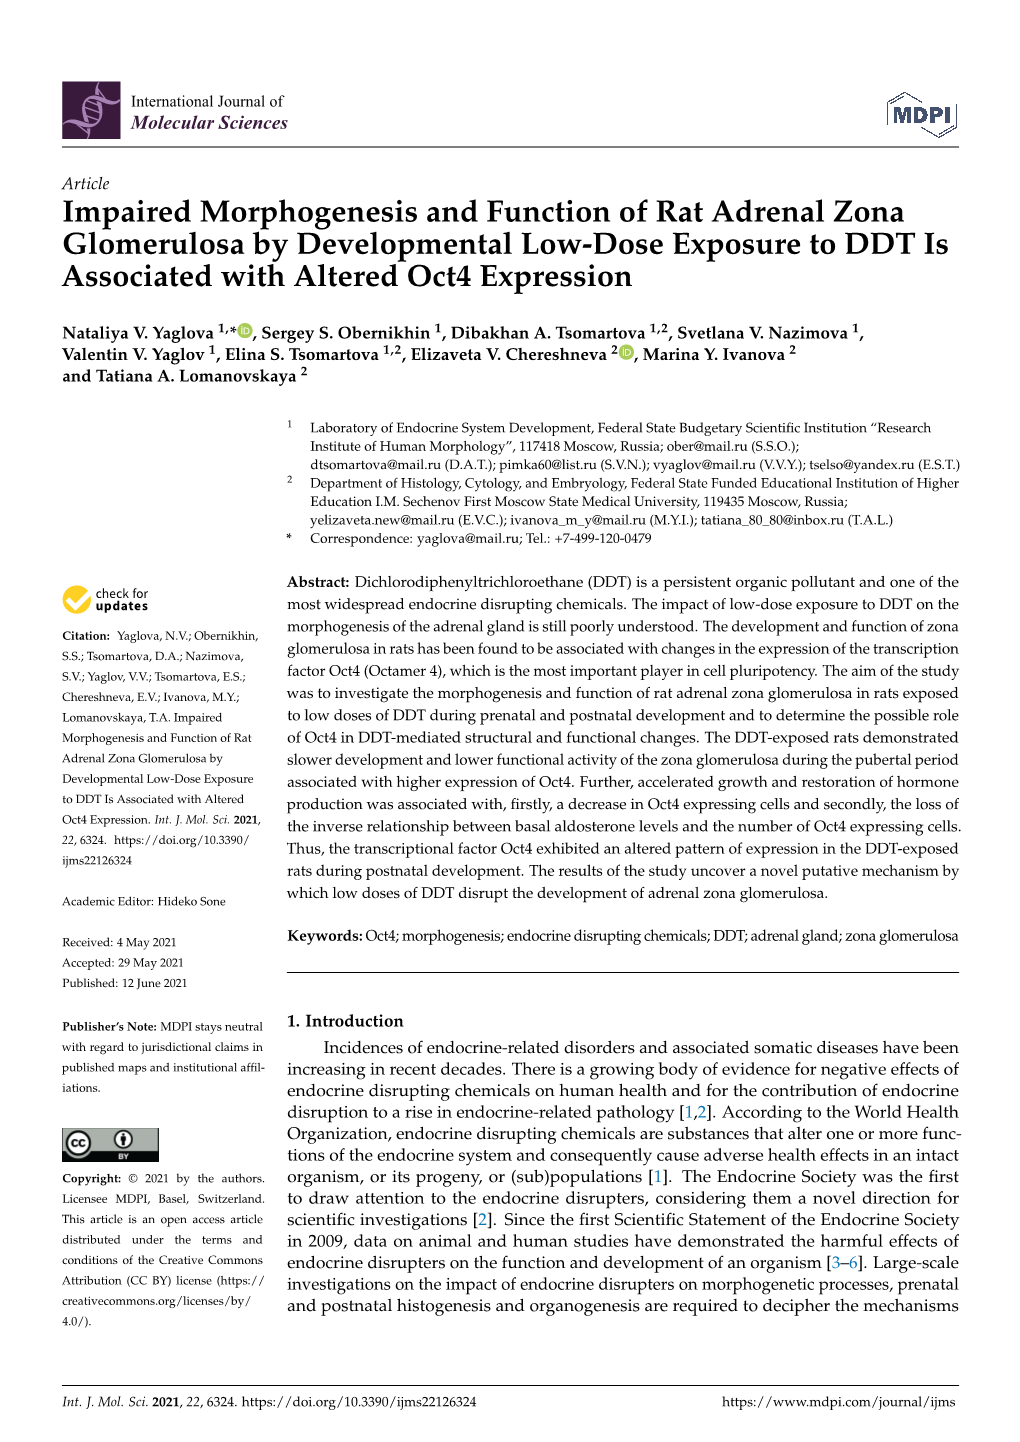 Impaired Morphogenesis and Function of Rat Adrenal Zona Glomerulosa by Developmental Low-Dose Exposure to DDT Is Associated with Altered Oct4 Expression